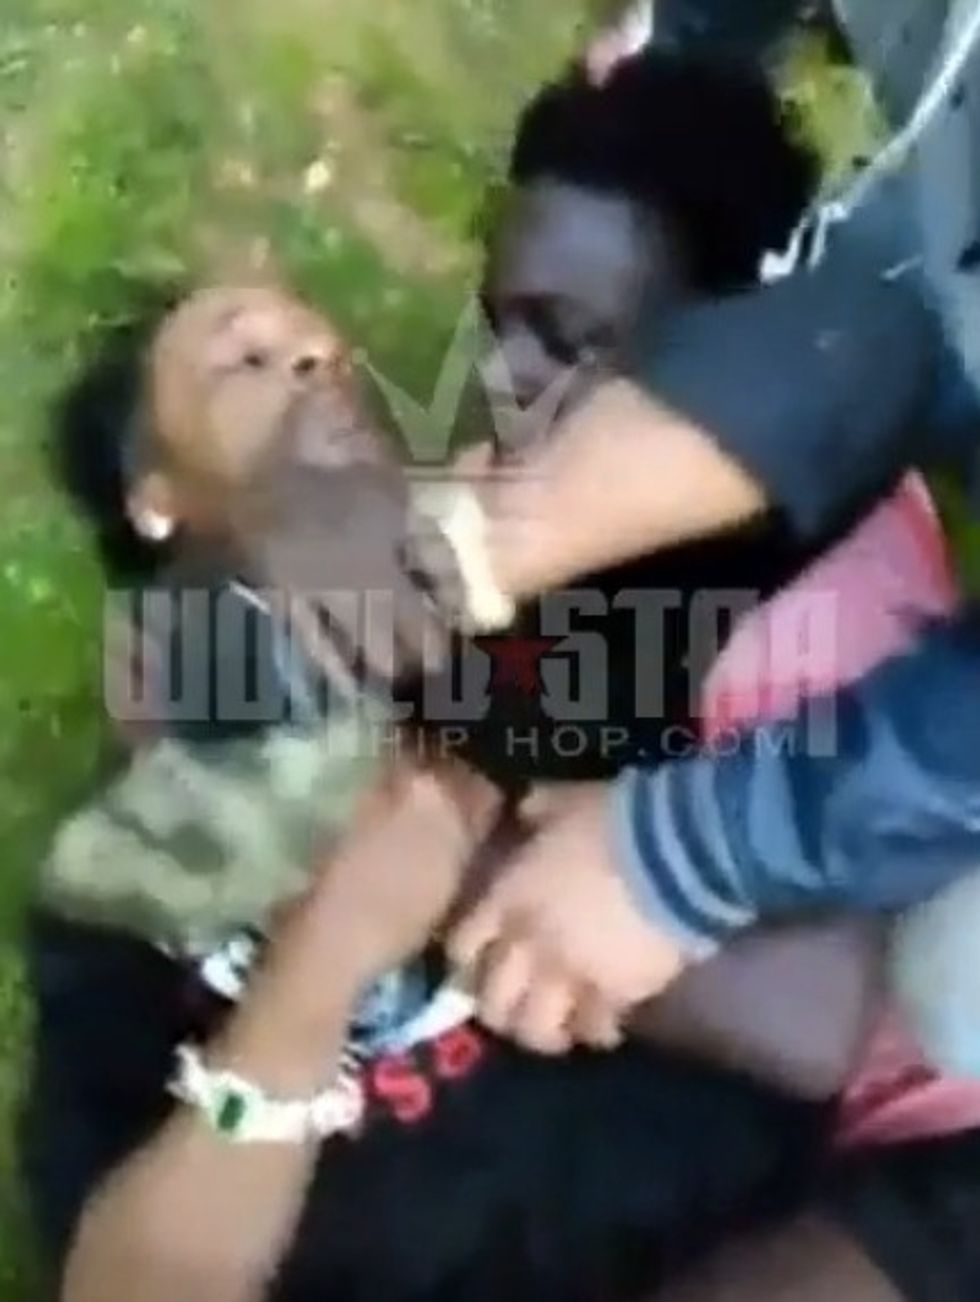 Comedian Katt Williams Allegedly Caught on Video Sucker-Punching Teen — but Then He Gets More Than He Bargained For